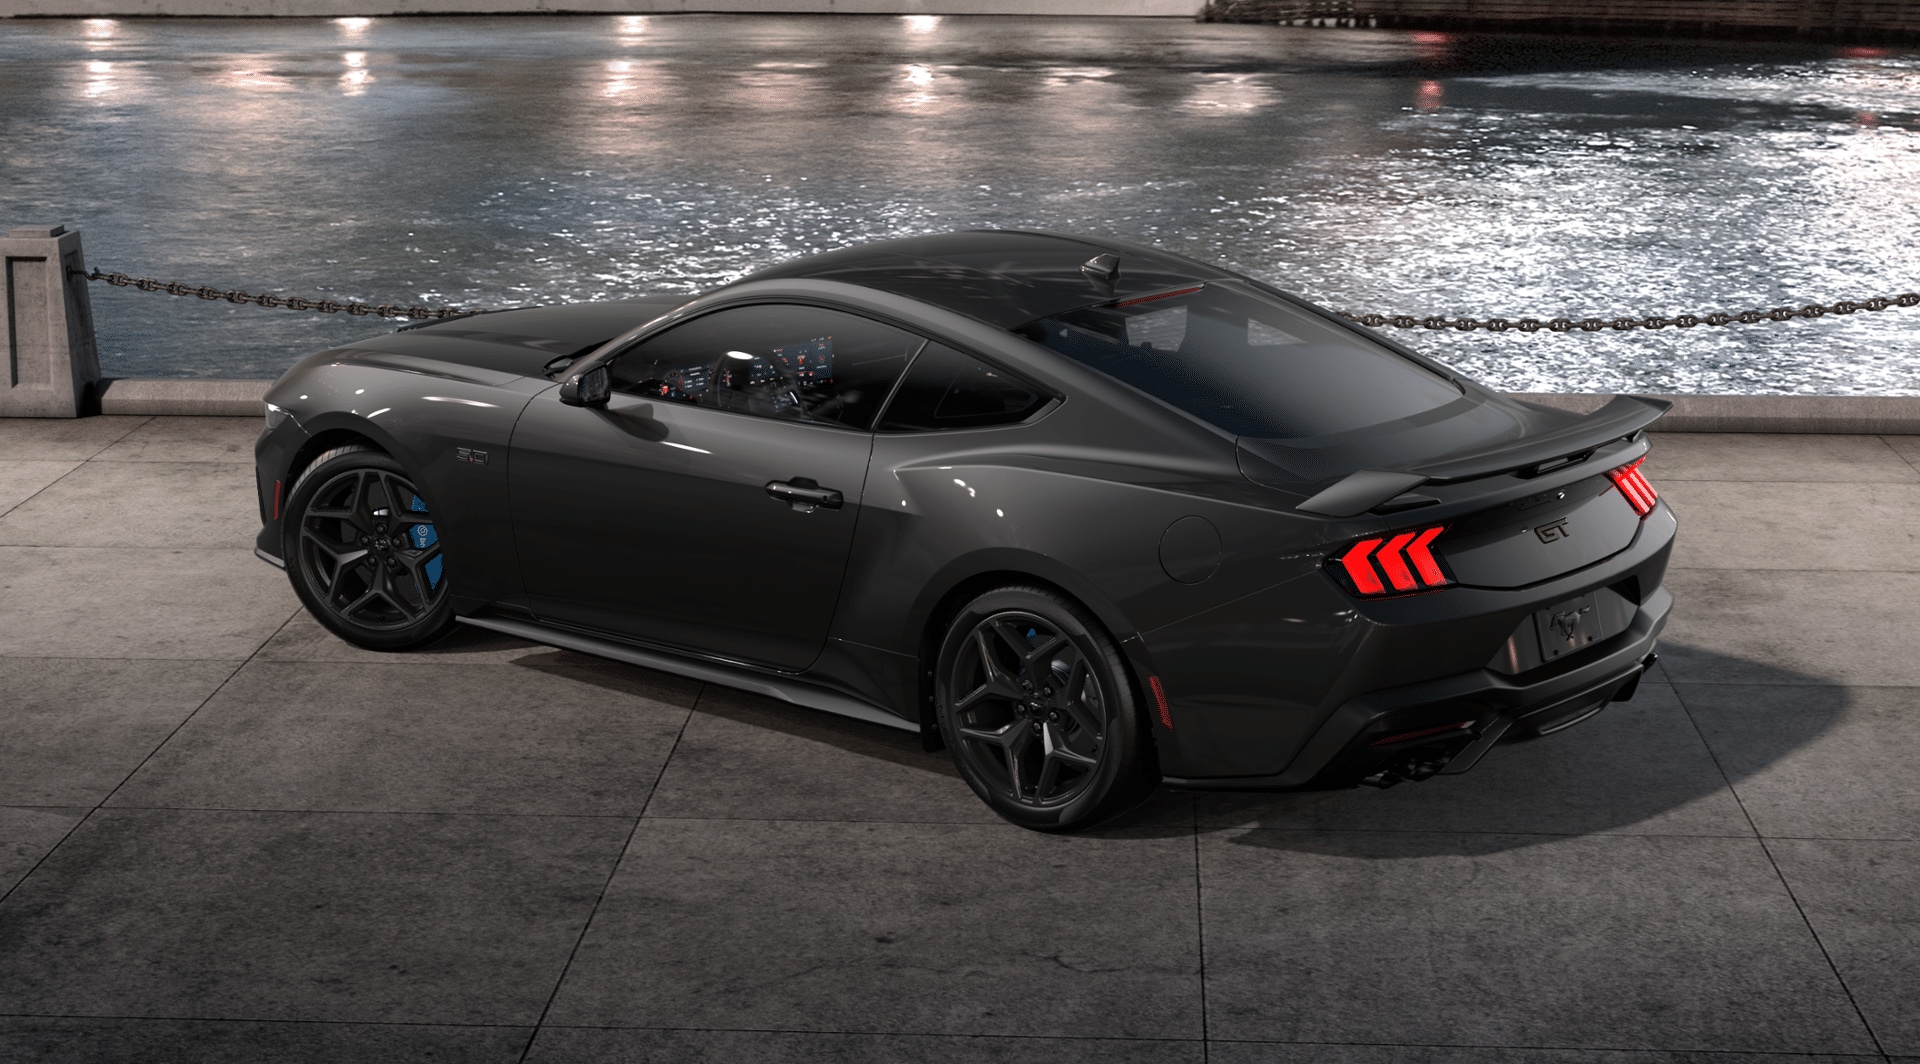 S650 Mustang 2024 Mustang Build & Price Configurator UPDATED!! [New Images] stan